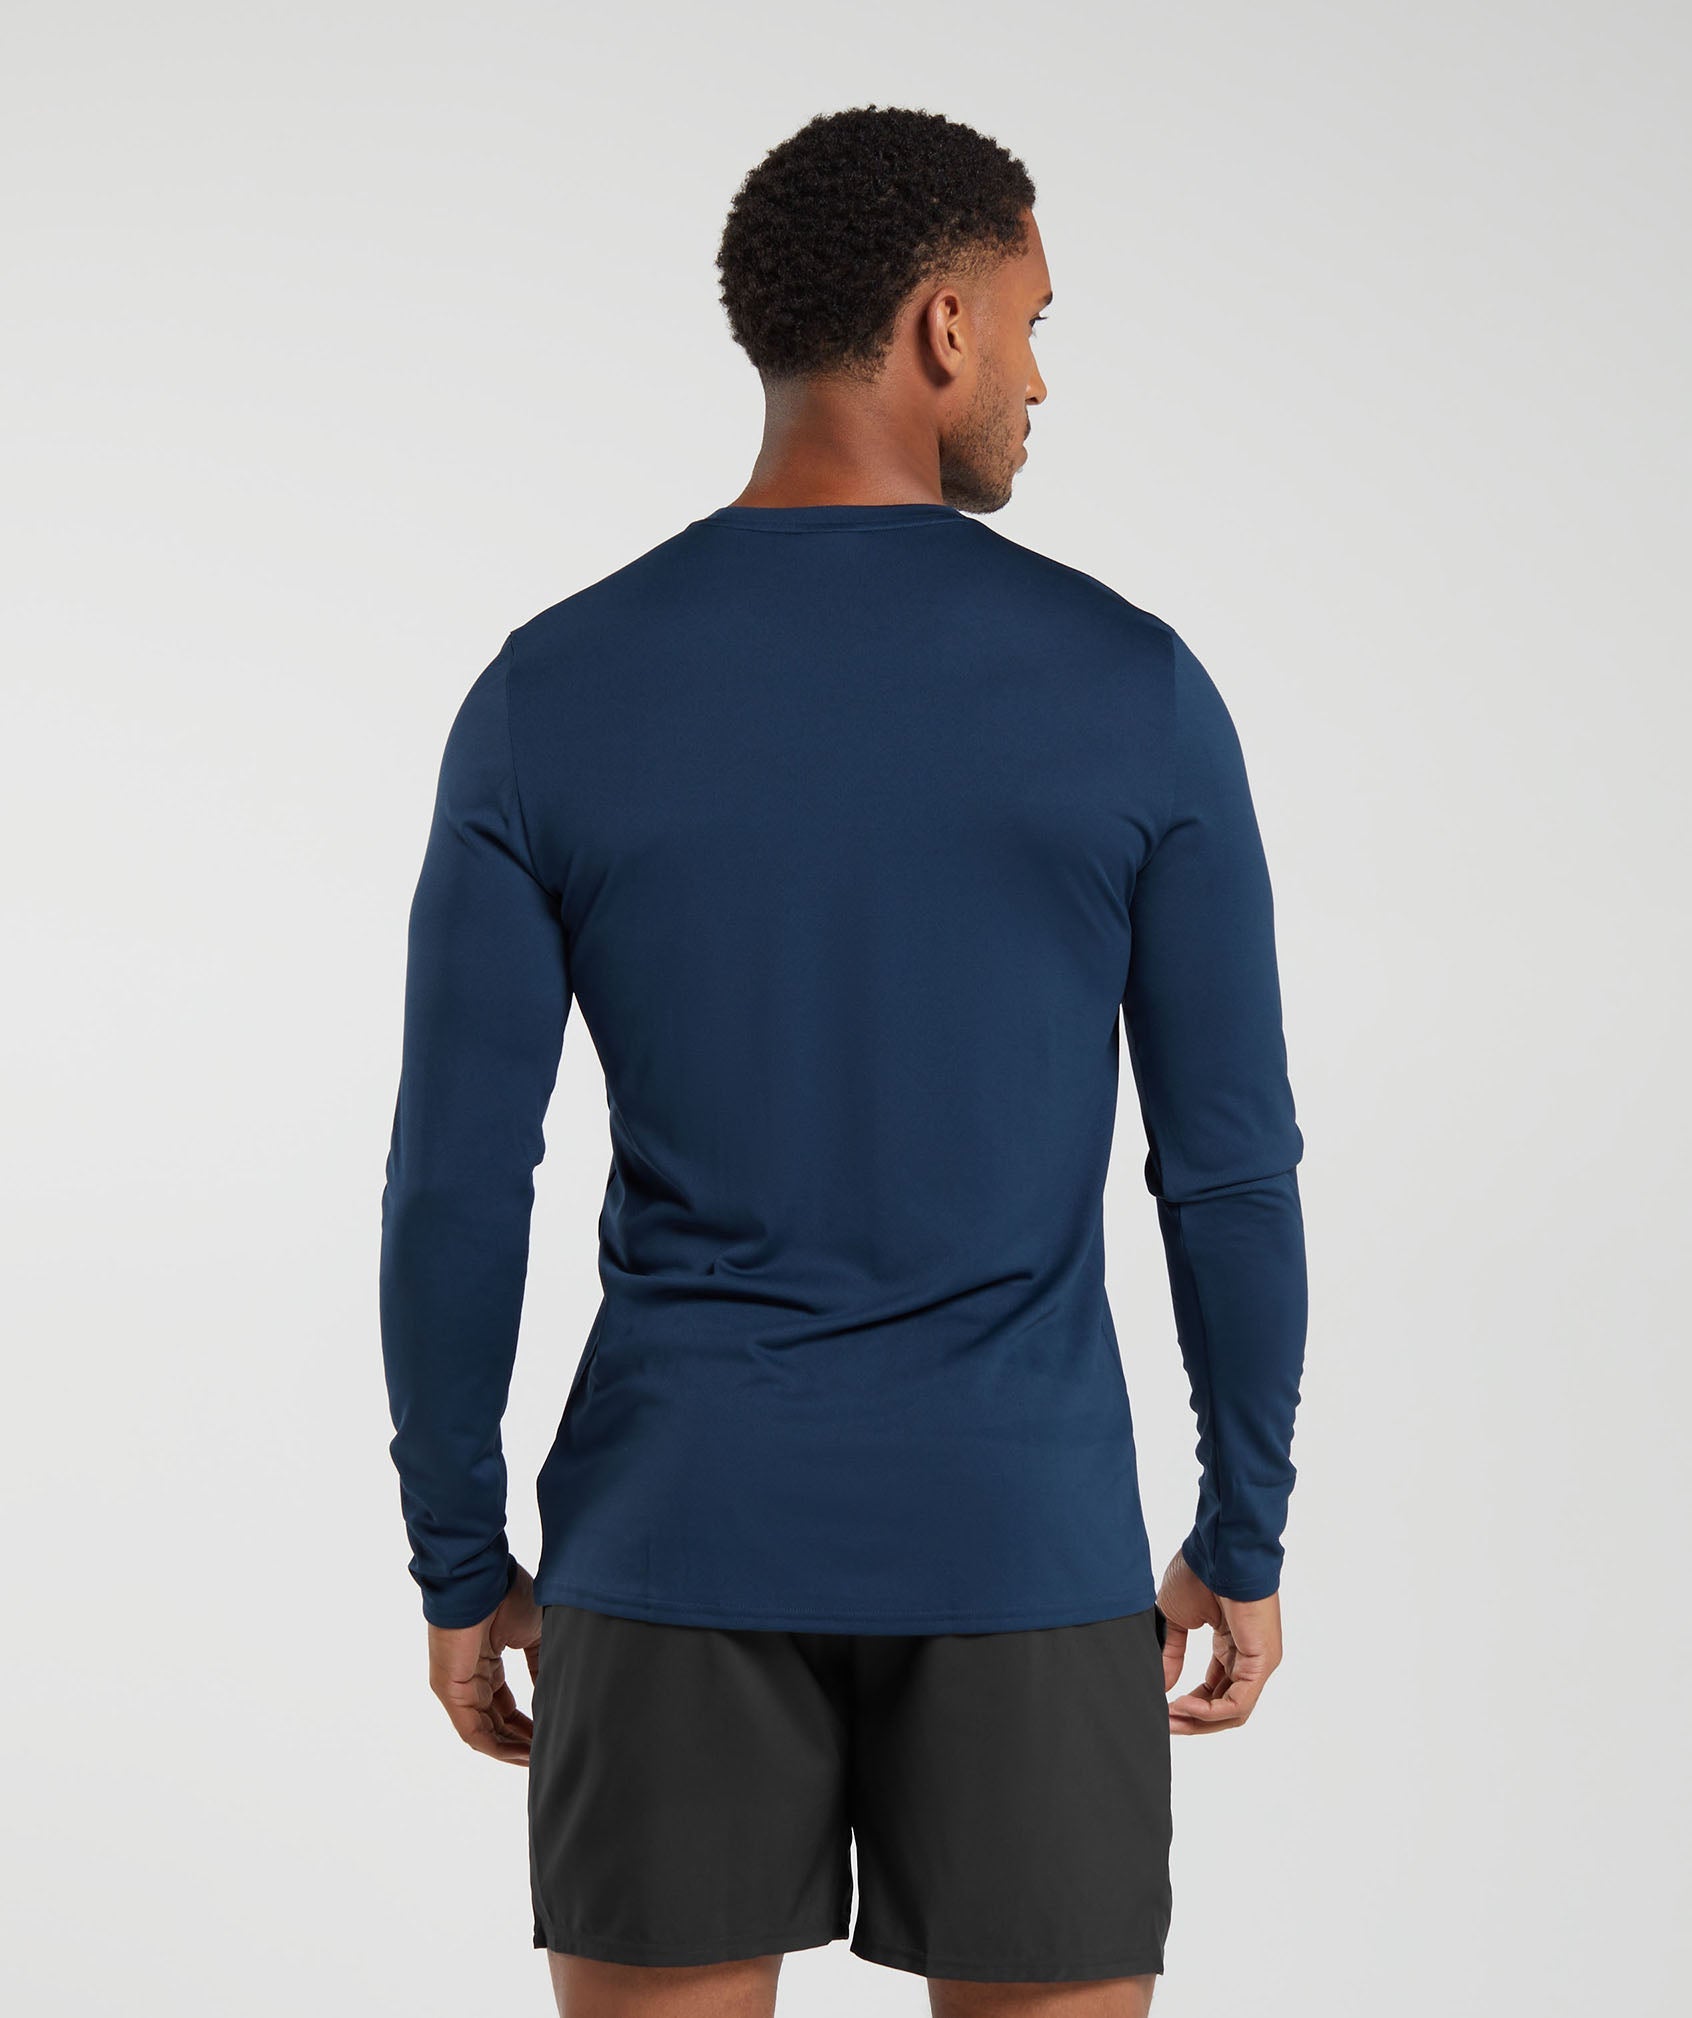 Arrival Long Sleeve T-Shirt in Navy